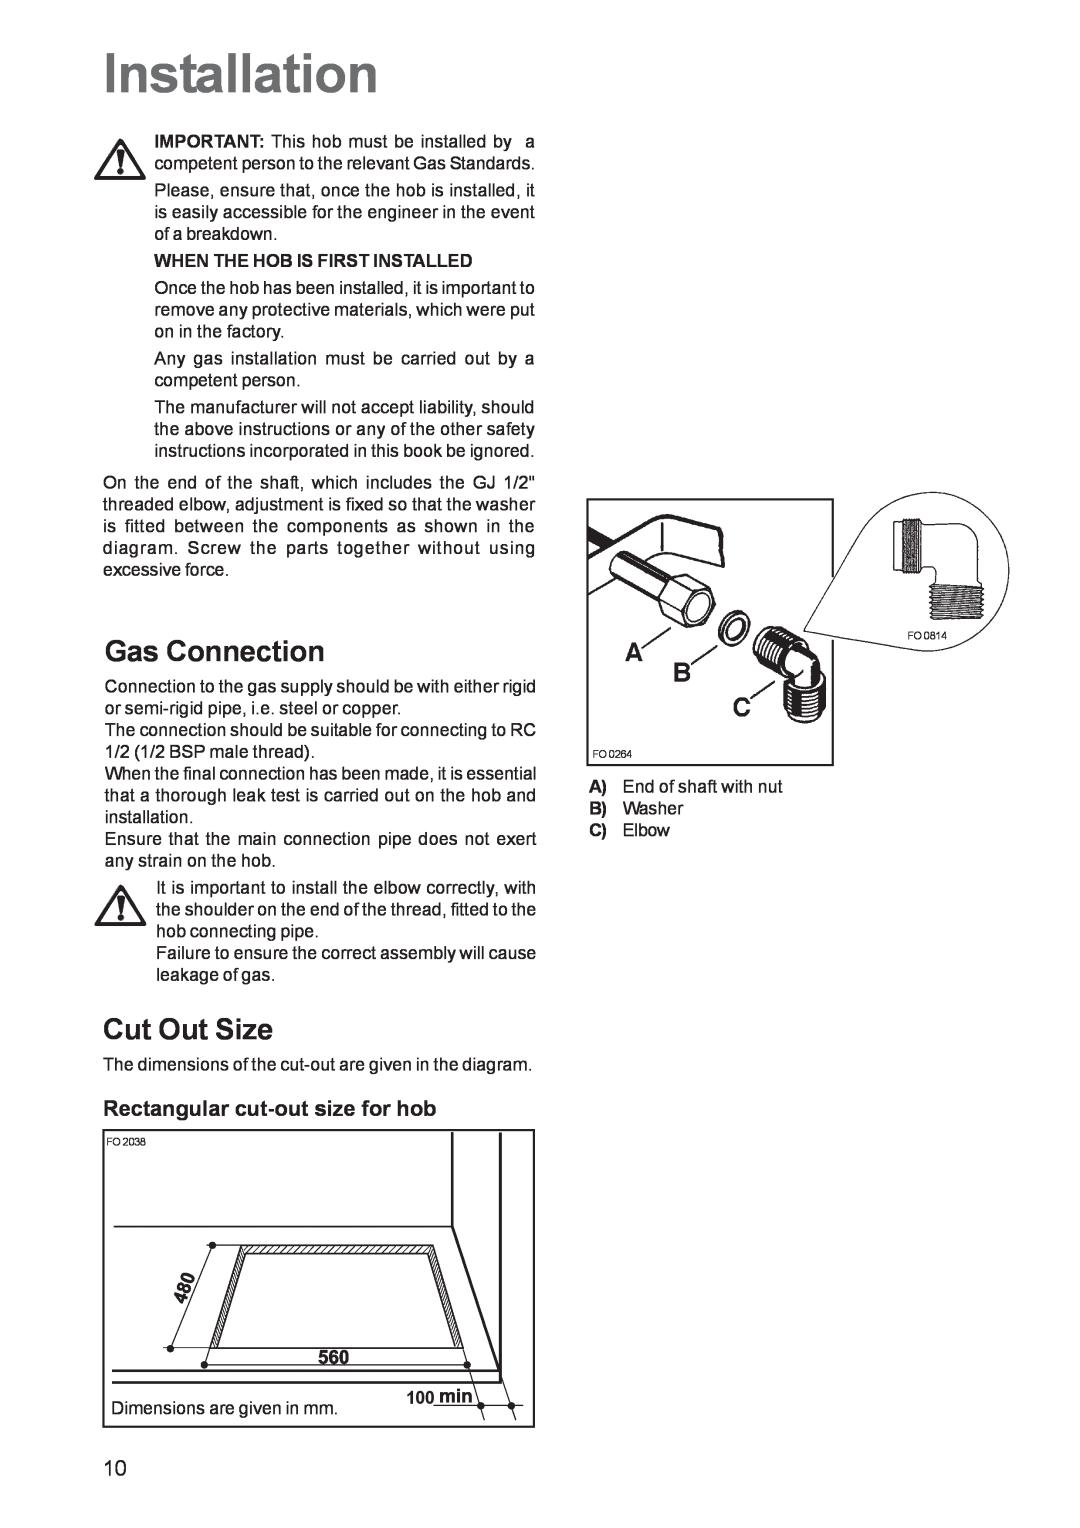 Electrolux EHG 6762 manual Installation, Gas Connection, Cut Out Size, Rectangular cut-out size for hob 